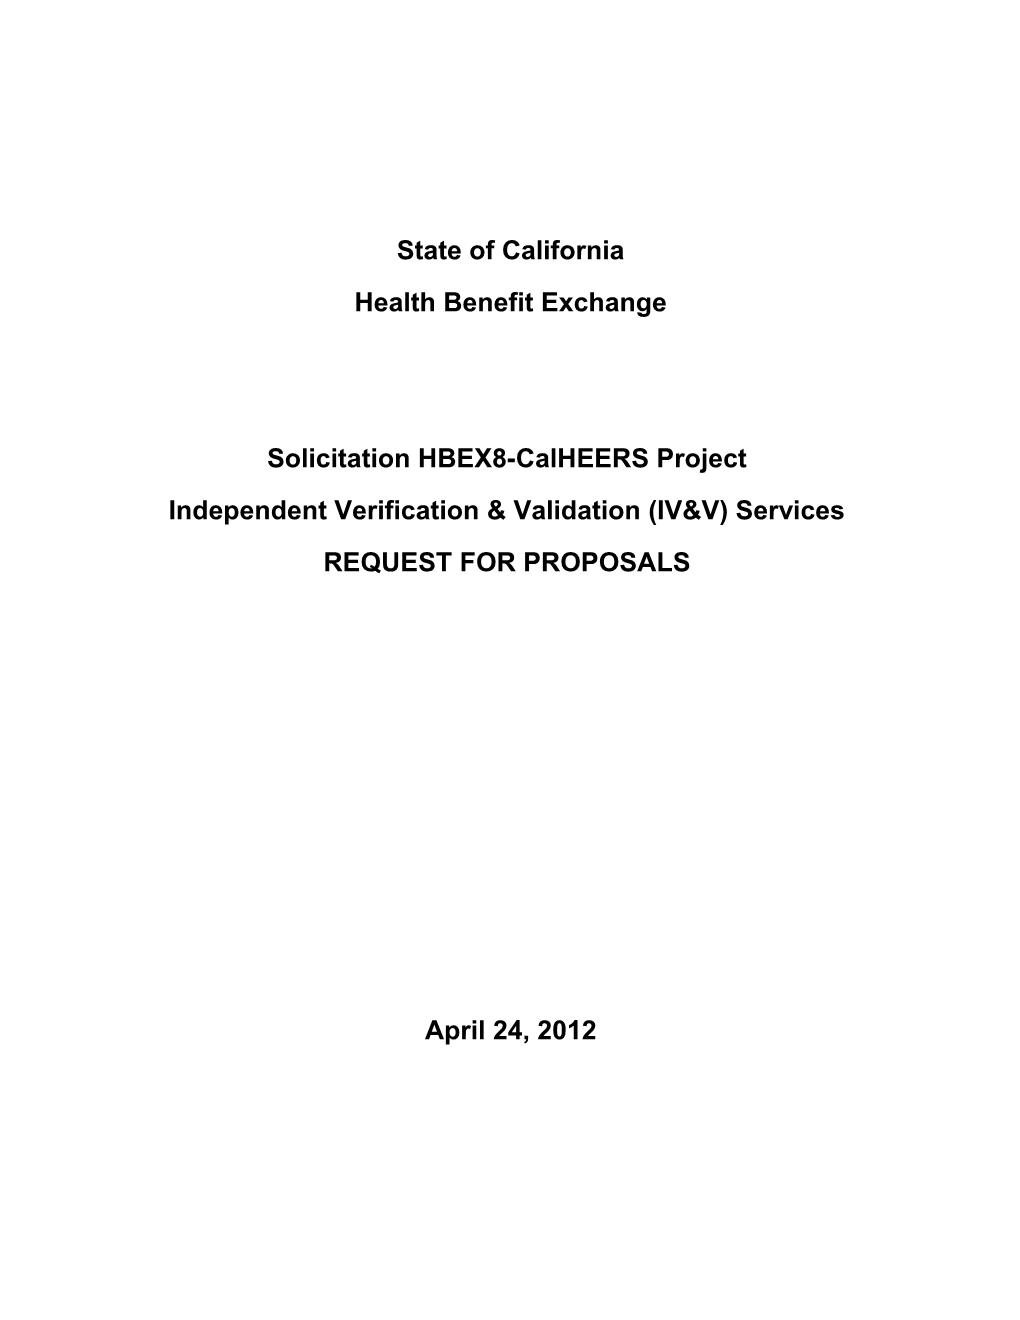 HBEX8 - Calheers Project Independent Verification And Validation Services RFP